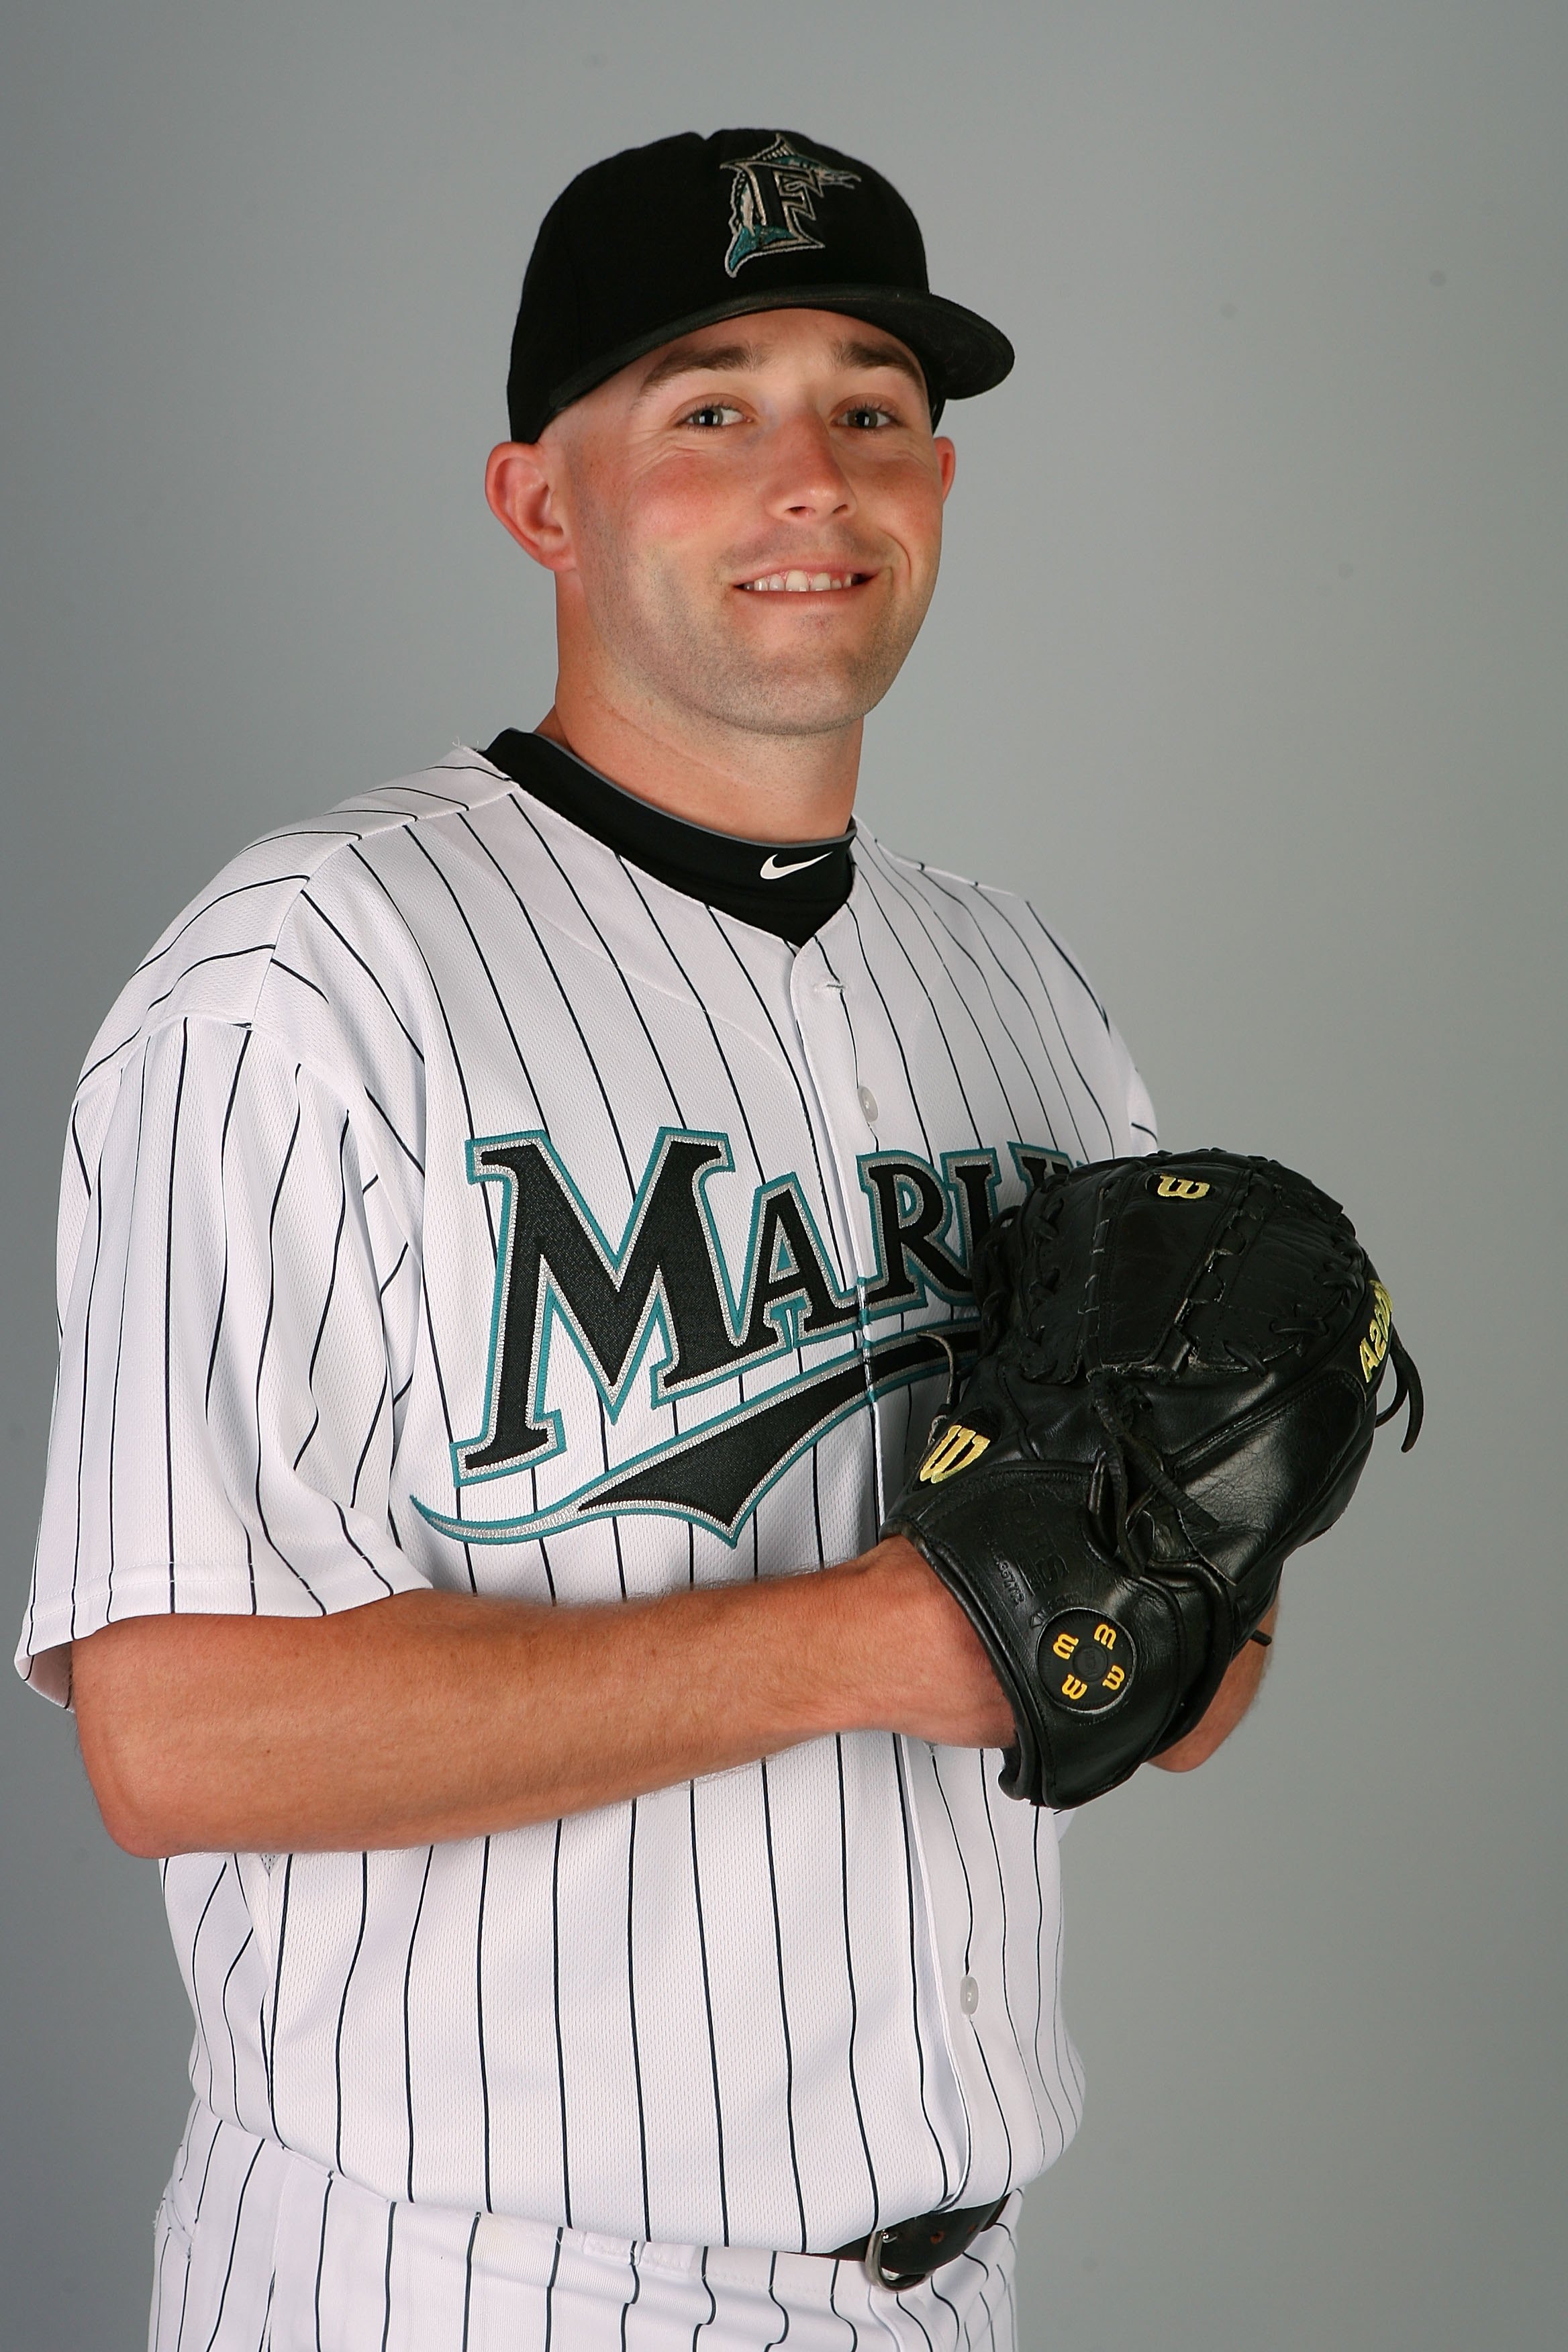 JUPITER, FL - MARCH 02:  Pitcher Taylor Tankersley #57 of the Florida Marlins poses during photo day at Roger Dean Stadium on March 2, 2010 in Jupiter, Florida.  (Photo by Doug Benc/Getty Images)